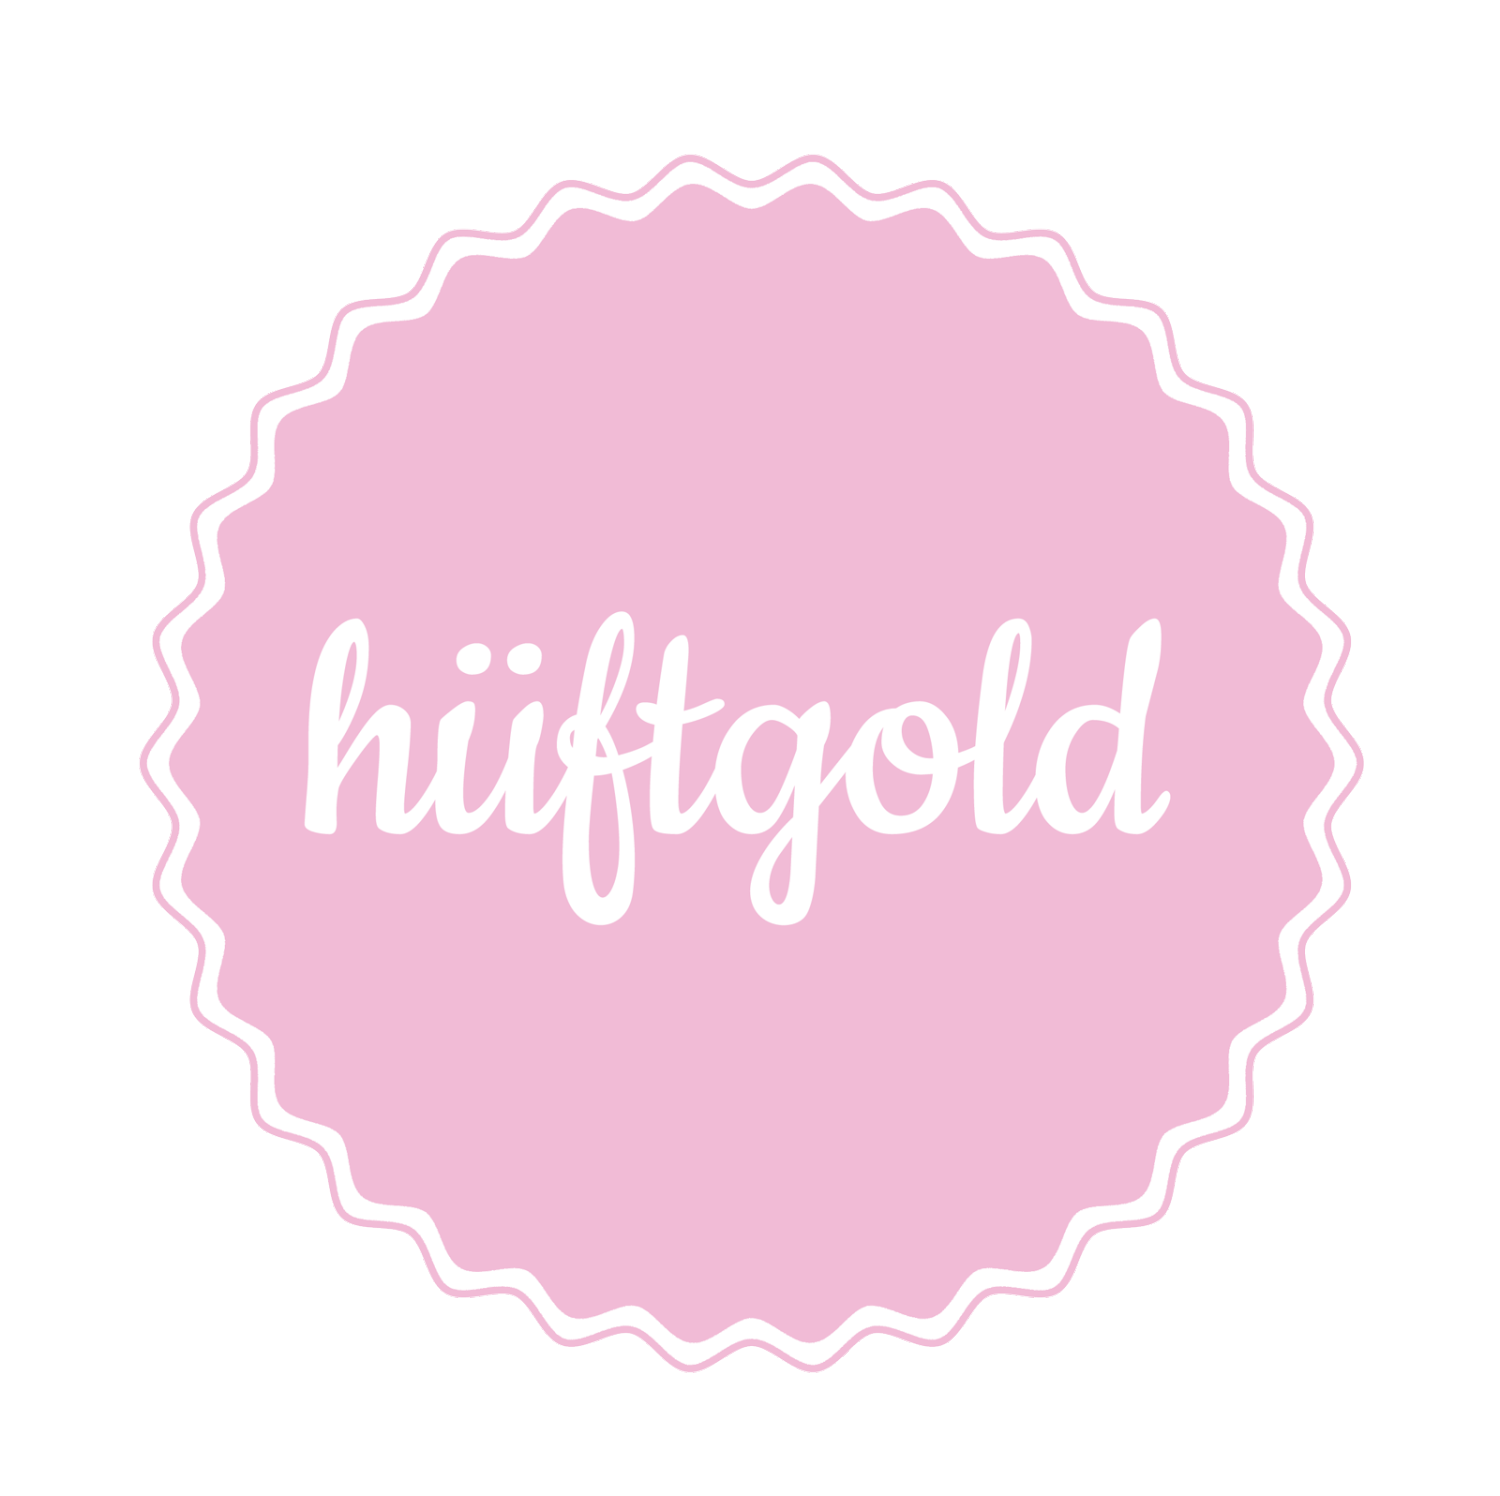 (c) Hueftgold-cupcakes.ch